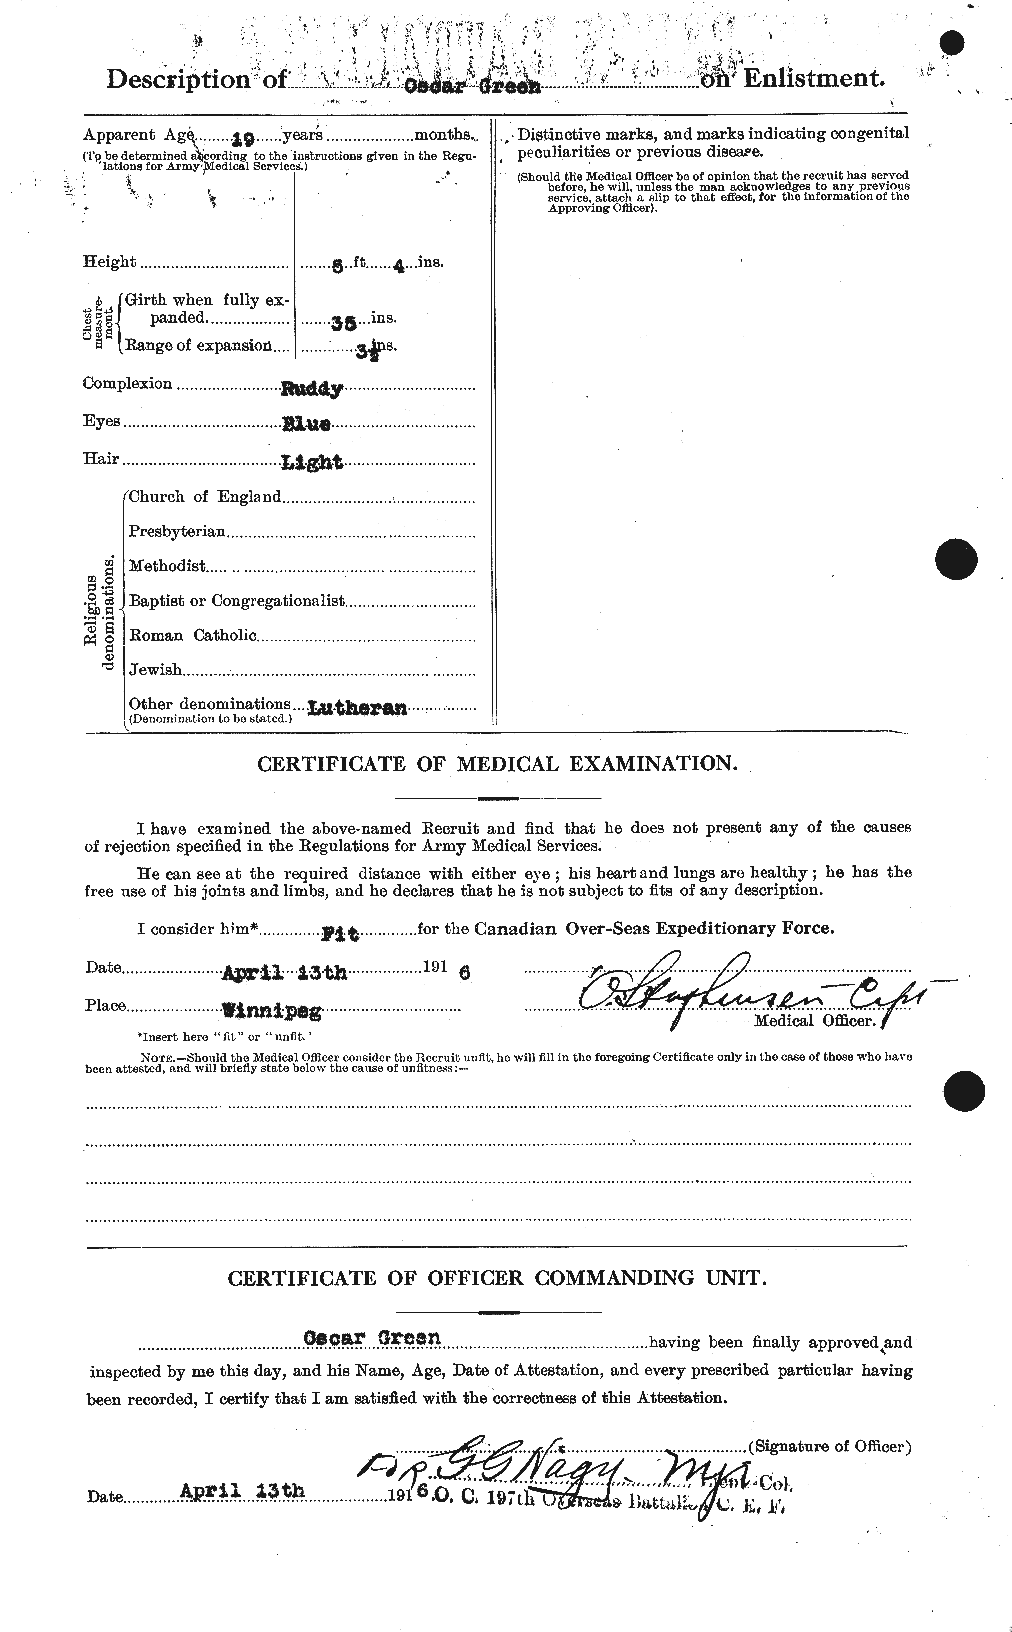 Personnel Records of the First World War - CEF 363587b